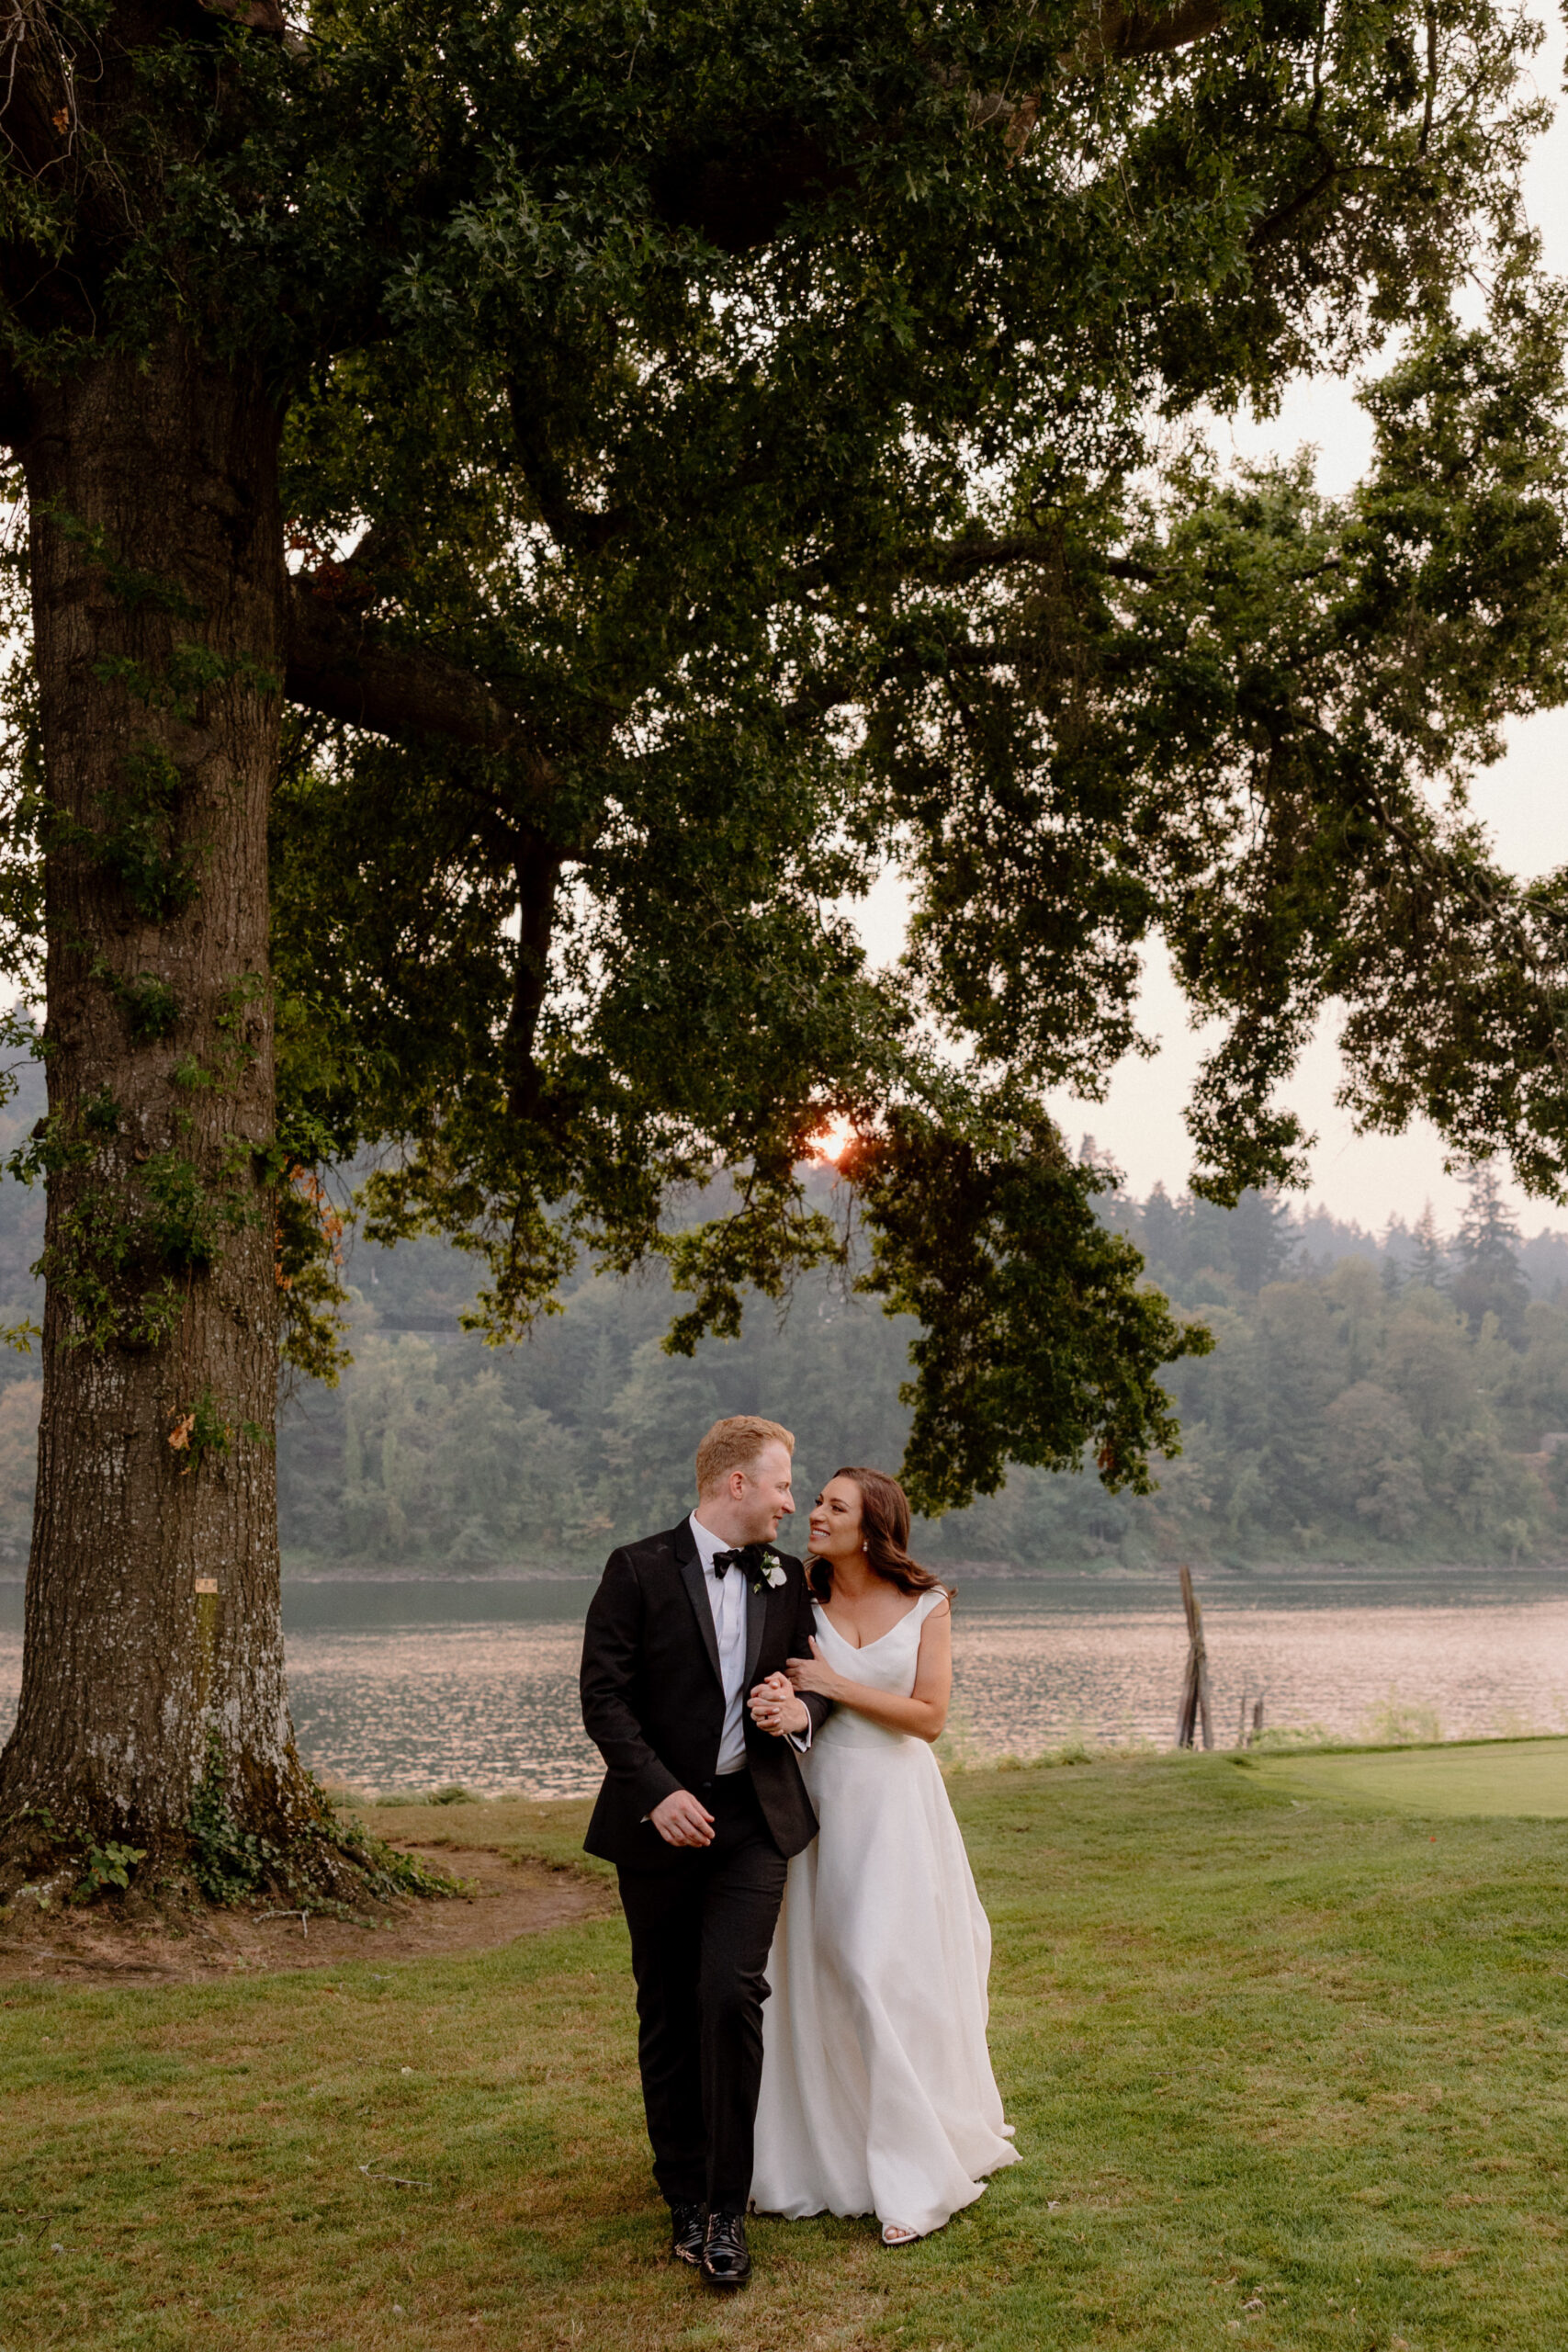 A bride and groom taking sunset photos at their Creekside Estate wedding in Washougal, WA.